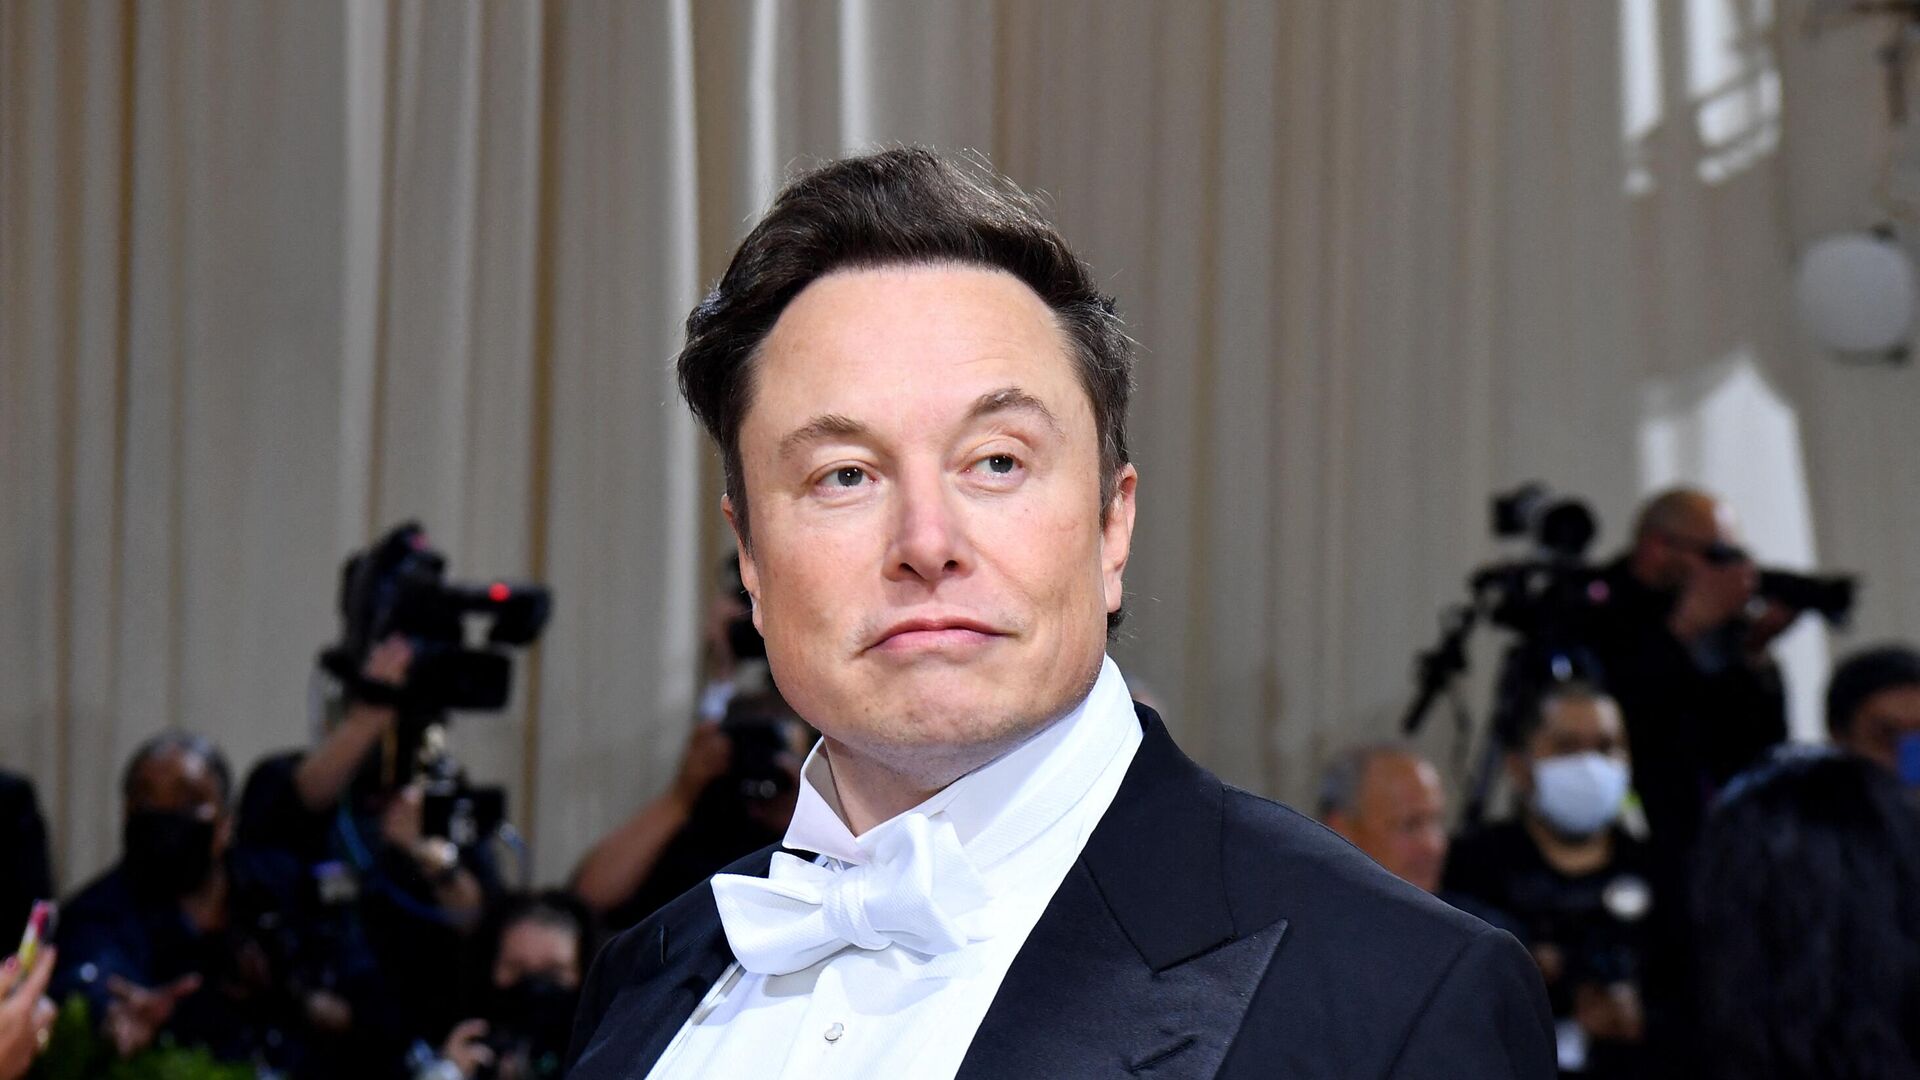 CEO, and chief engineer at SpaceX, Elon Musk, arrives for the 2022 Met Gala at the Metropolitan Museum of Art on May 2, 2022, in New York. - Sputnik India, 1920, 19.12.2022